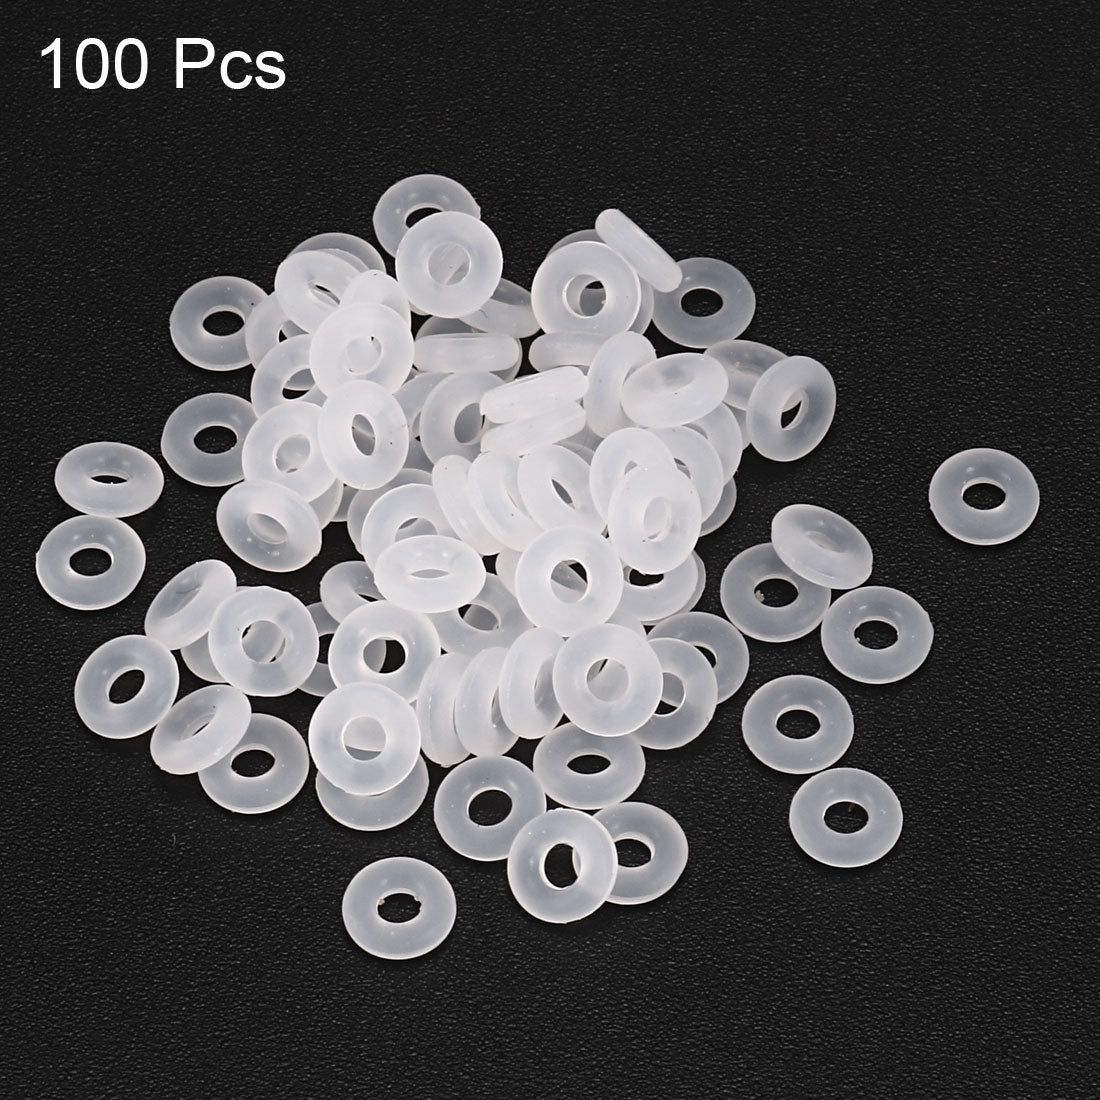 uxcell Uxcell 100Pcs White 7mm x 1.5mm Heat Resistance Oil Resistant NBR Nitrile Rubber O Ring Sealing Ring